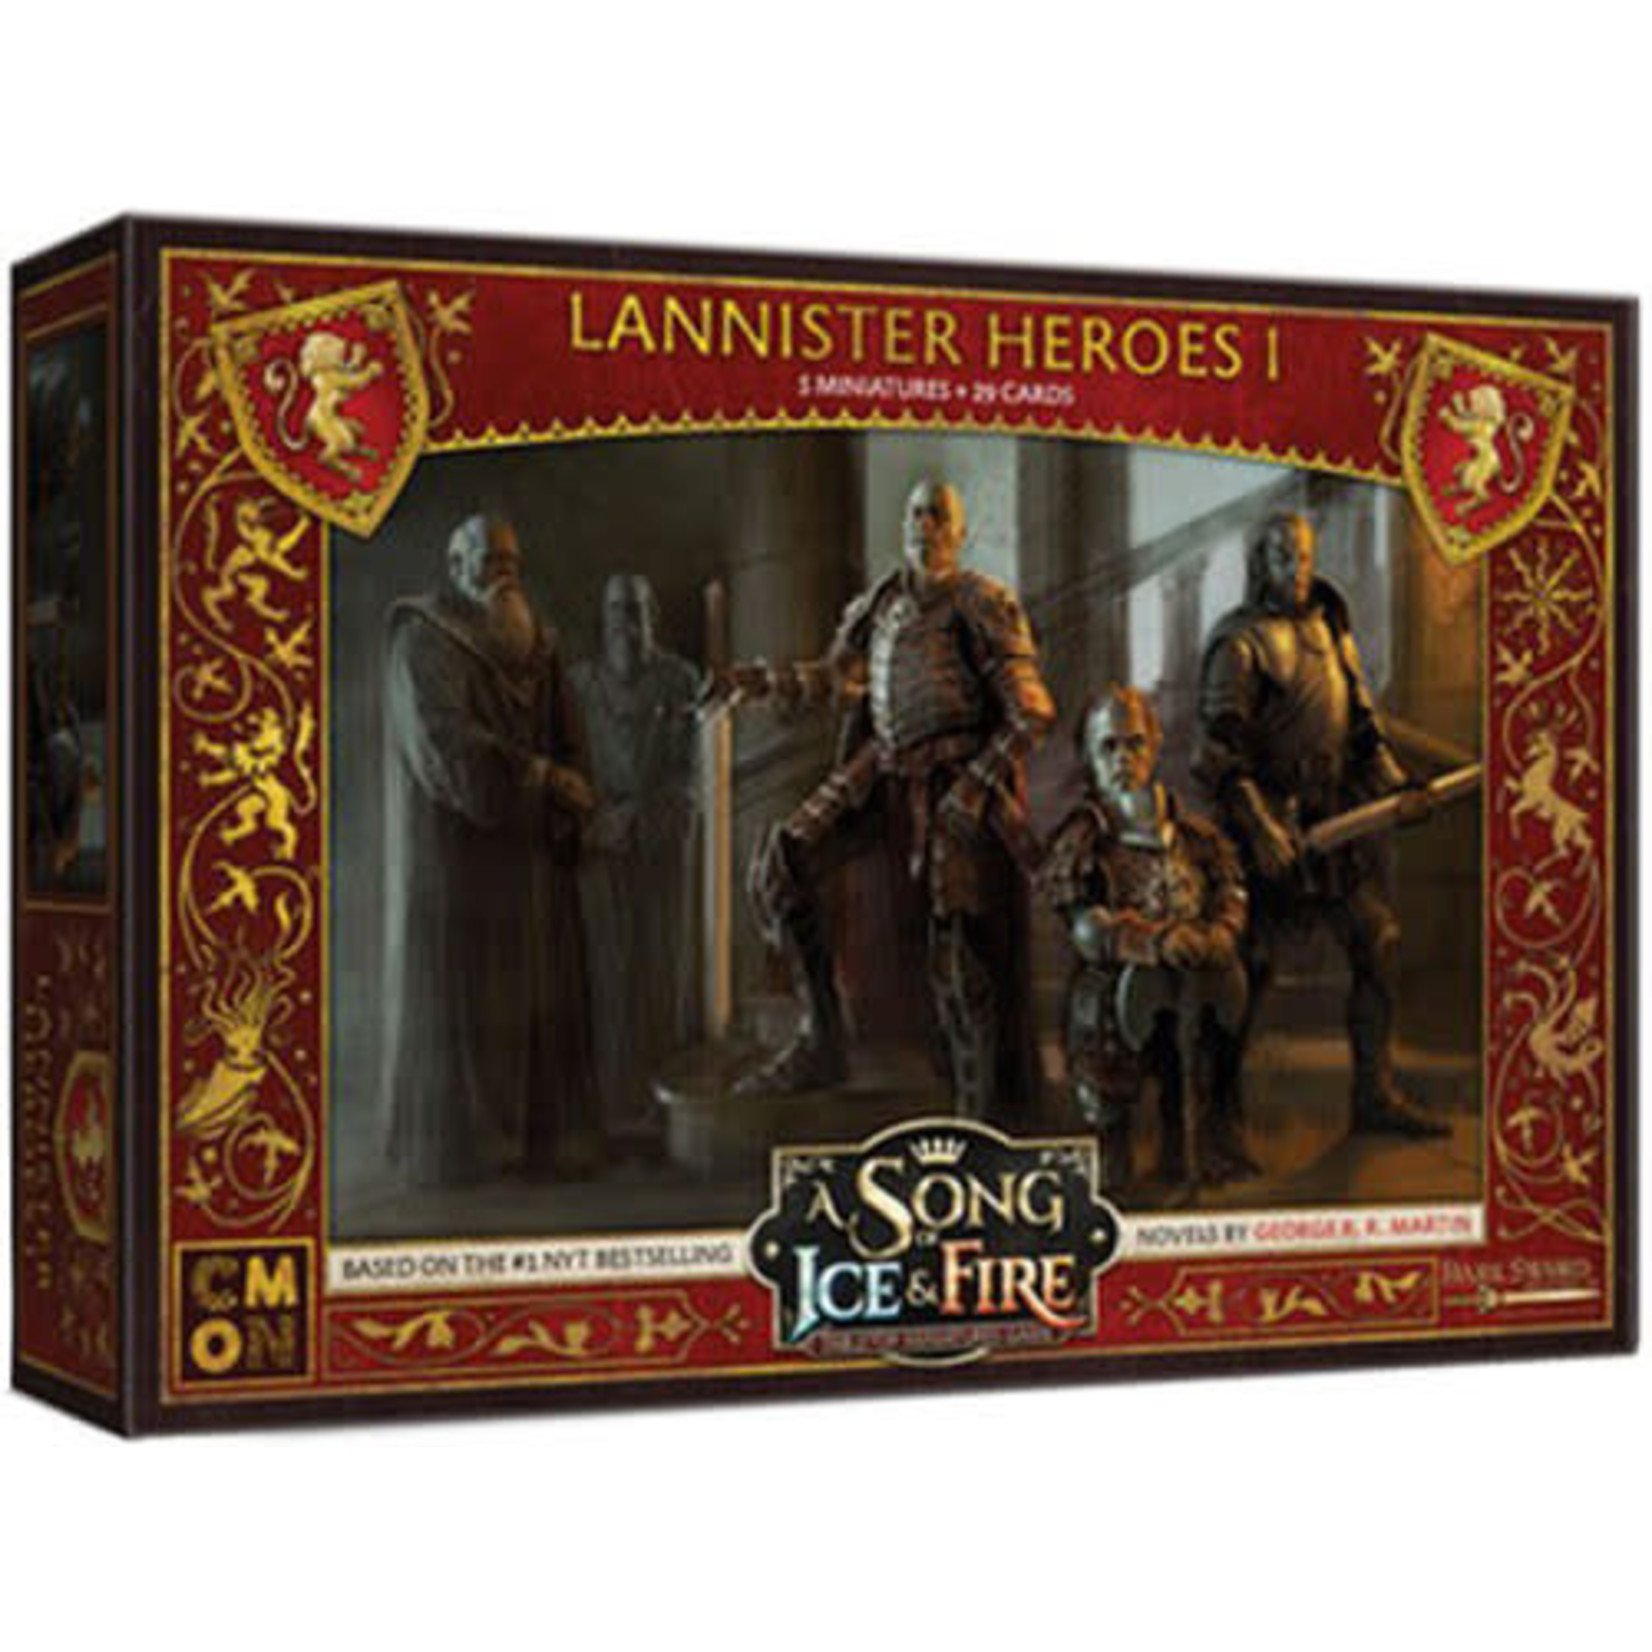 A Song of Fire and Ice: Lannister Heroes #1